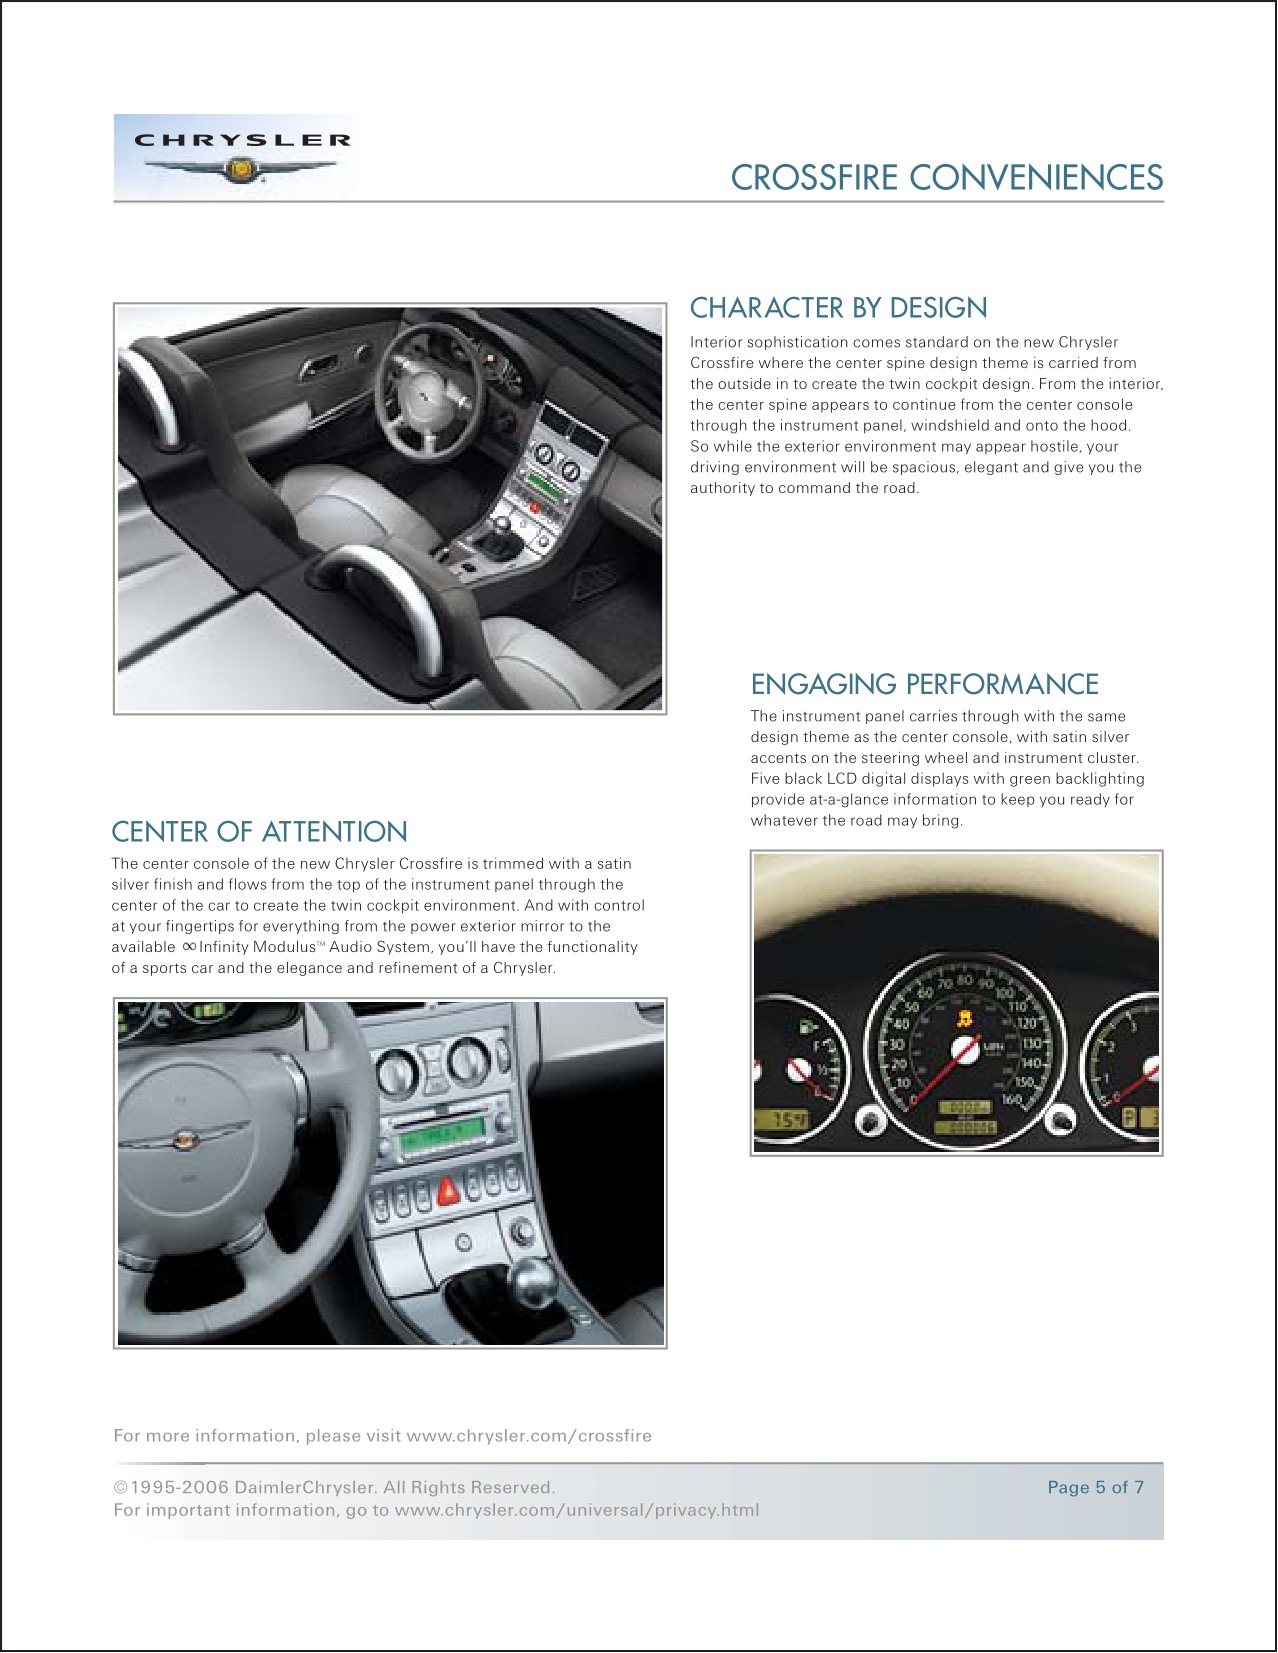 2006 Chrysler Crossfire Brochure Page 7